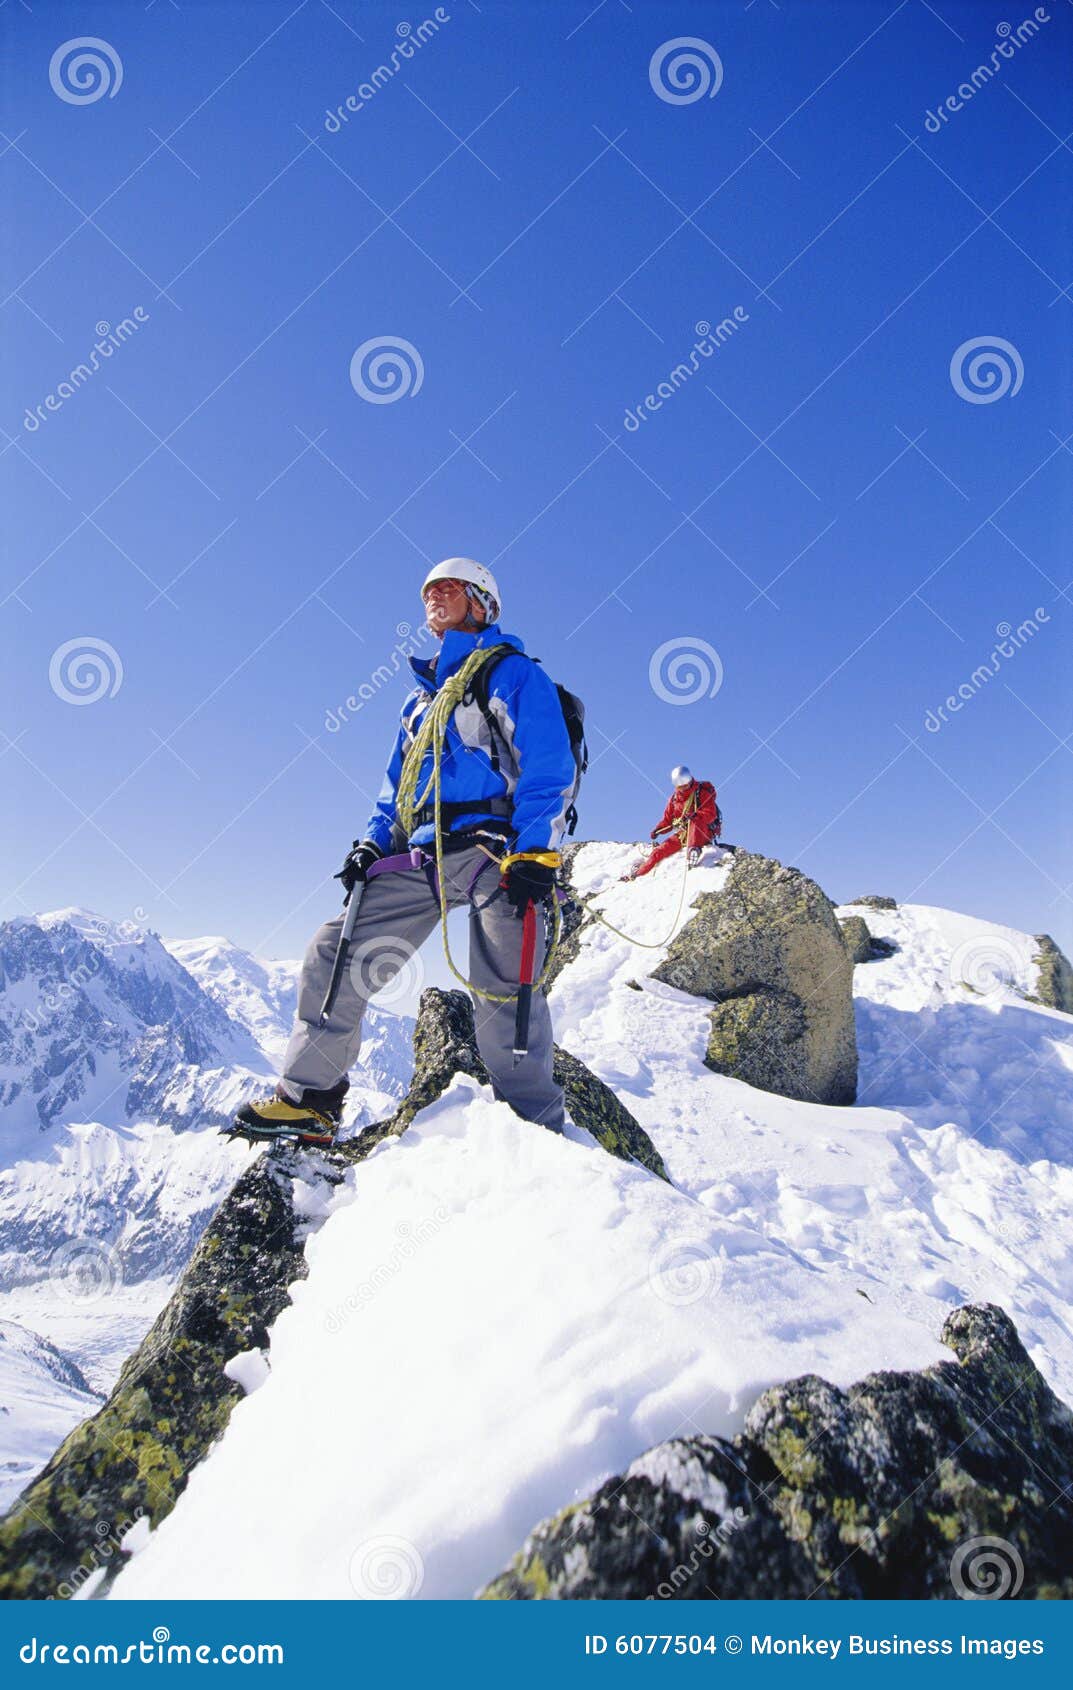 36,358 Climbing Clothes Royalty-Free Photos and Stock Images